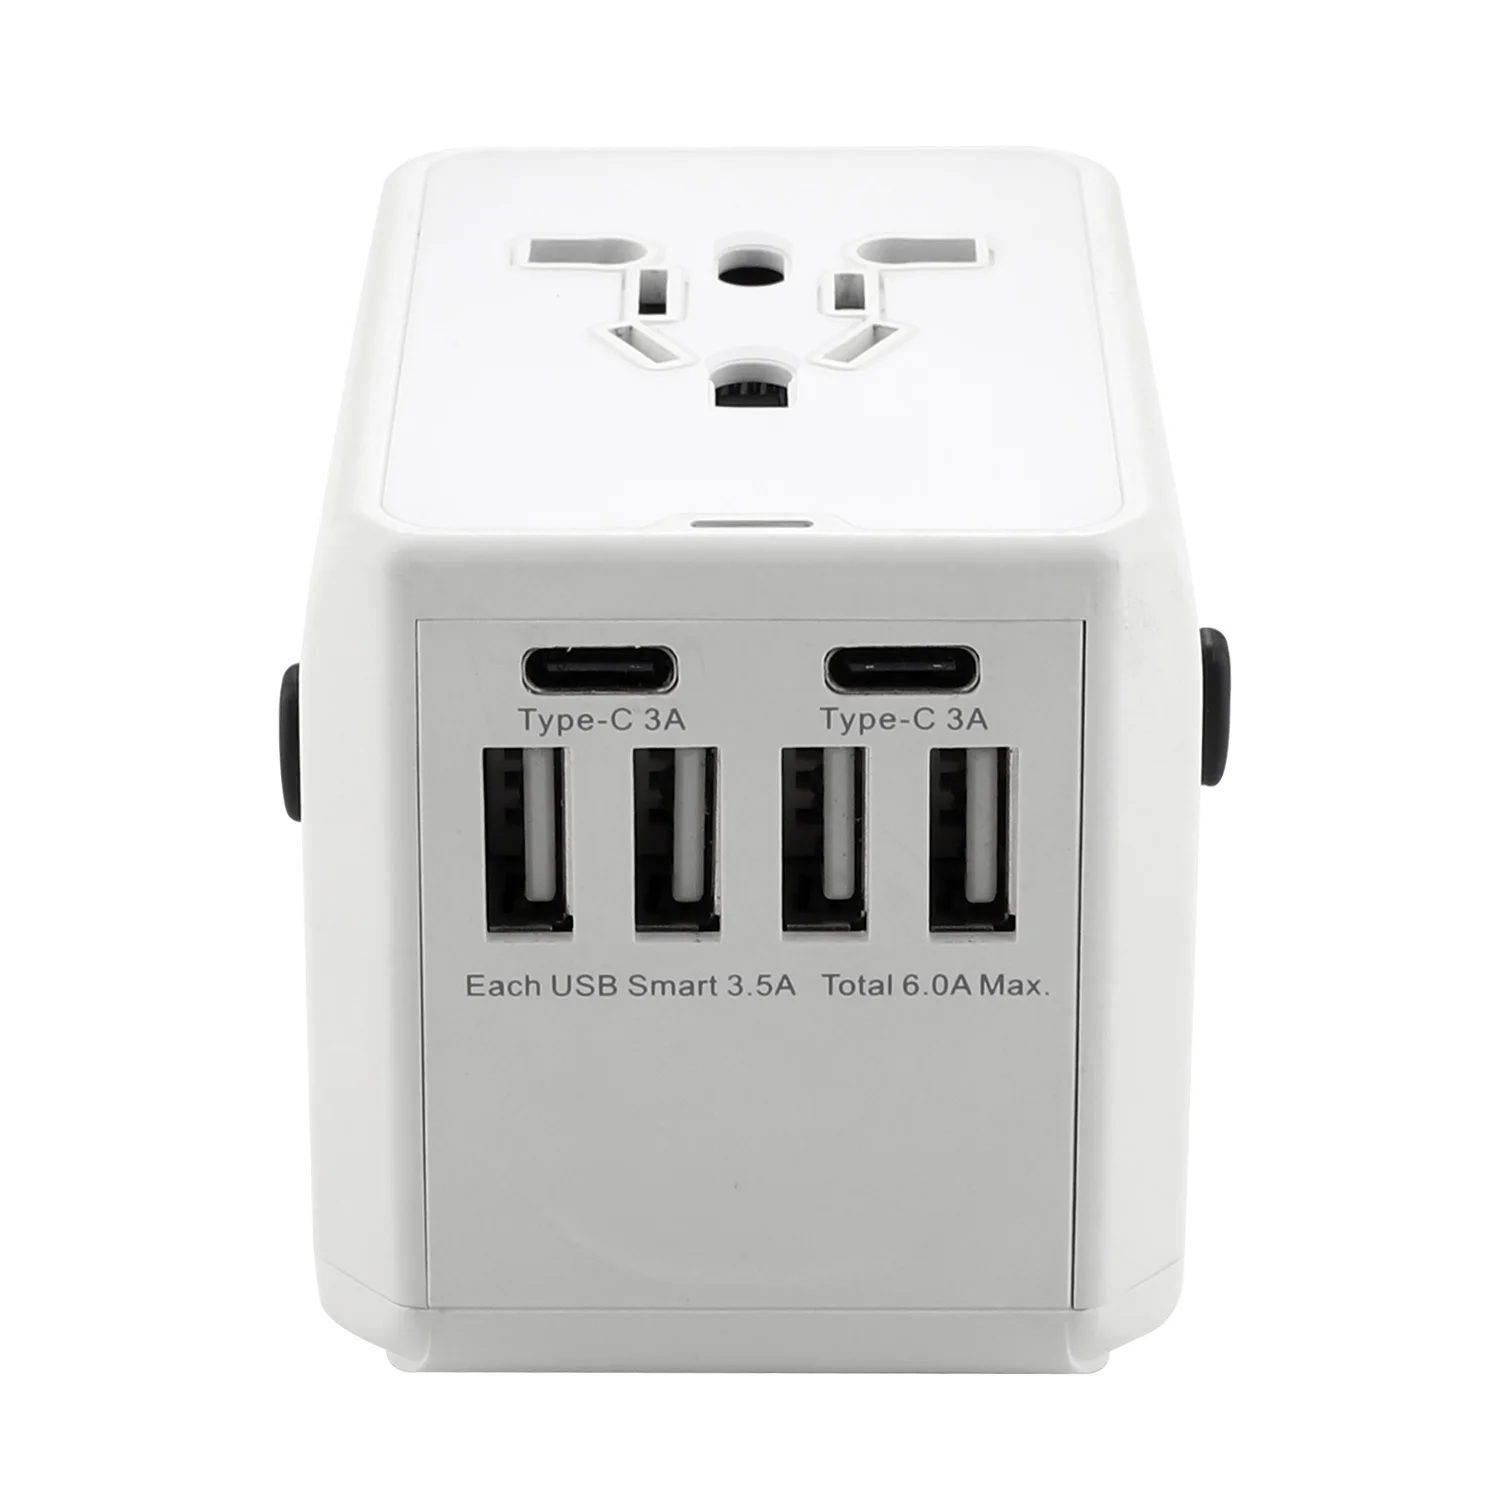 

Top High Quality Safe Travel International Universal Wall Power Adapter 45W PD Type C USB Chargers for US/AUS/EU/UK 2PCS